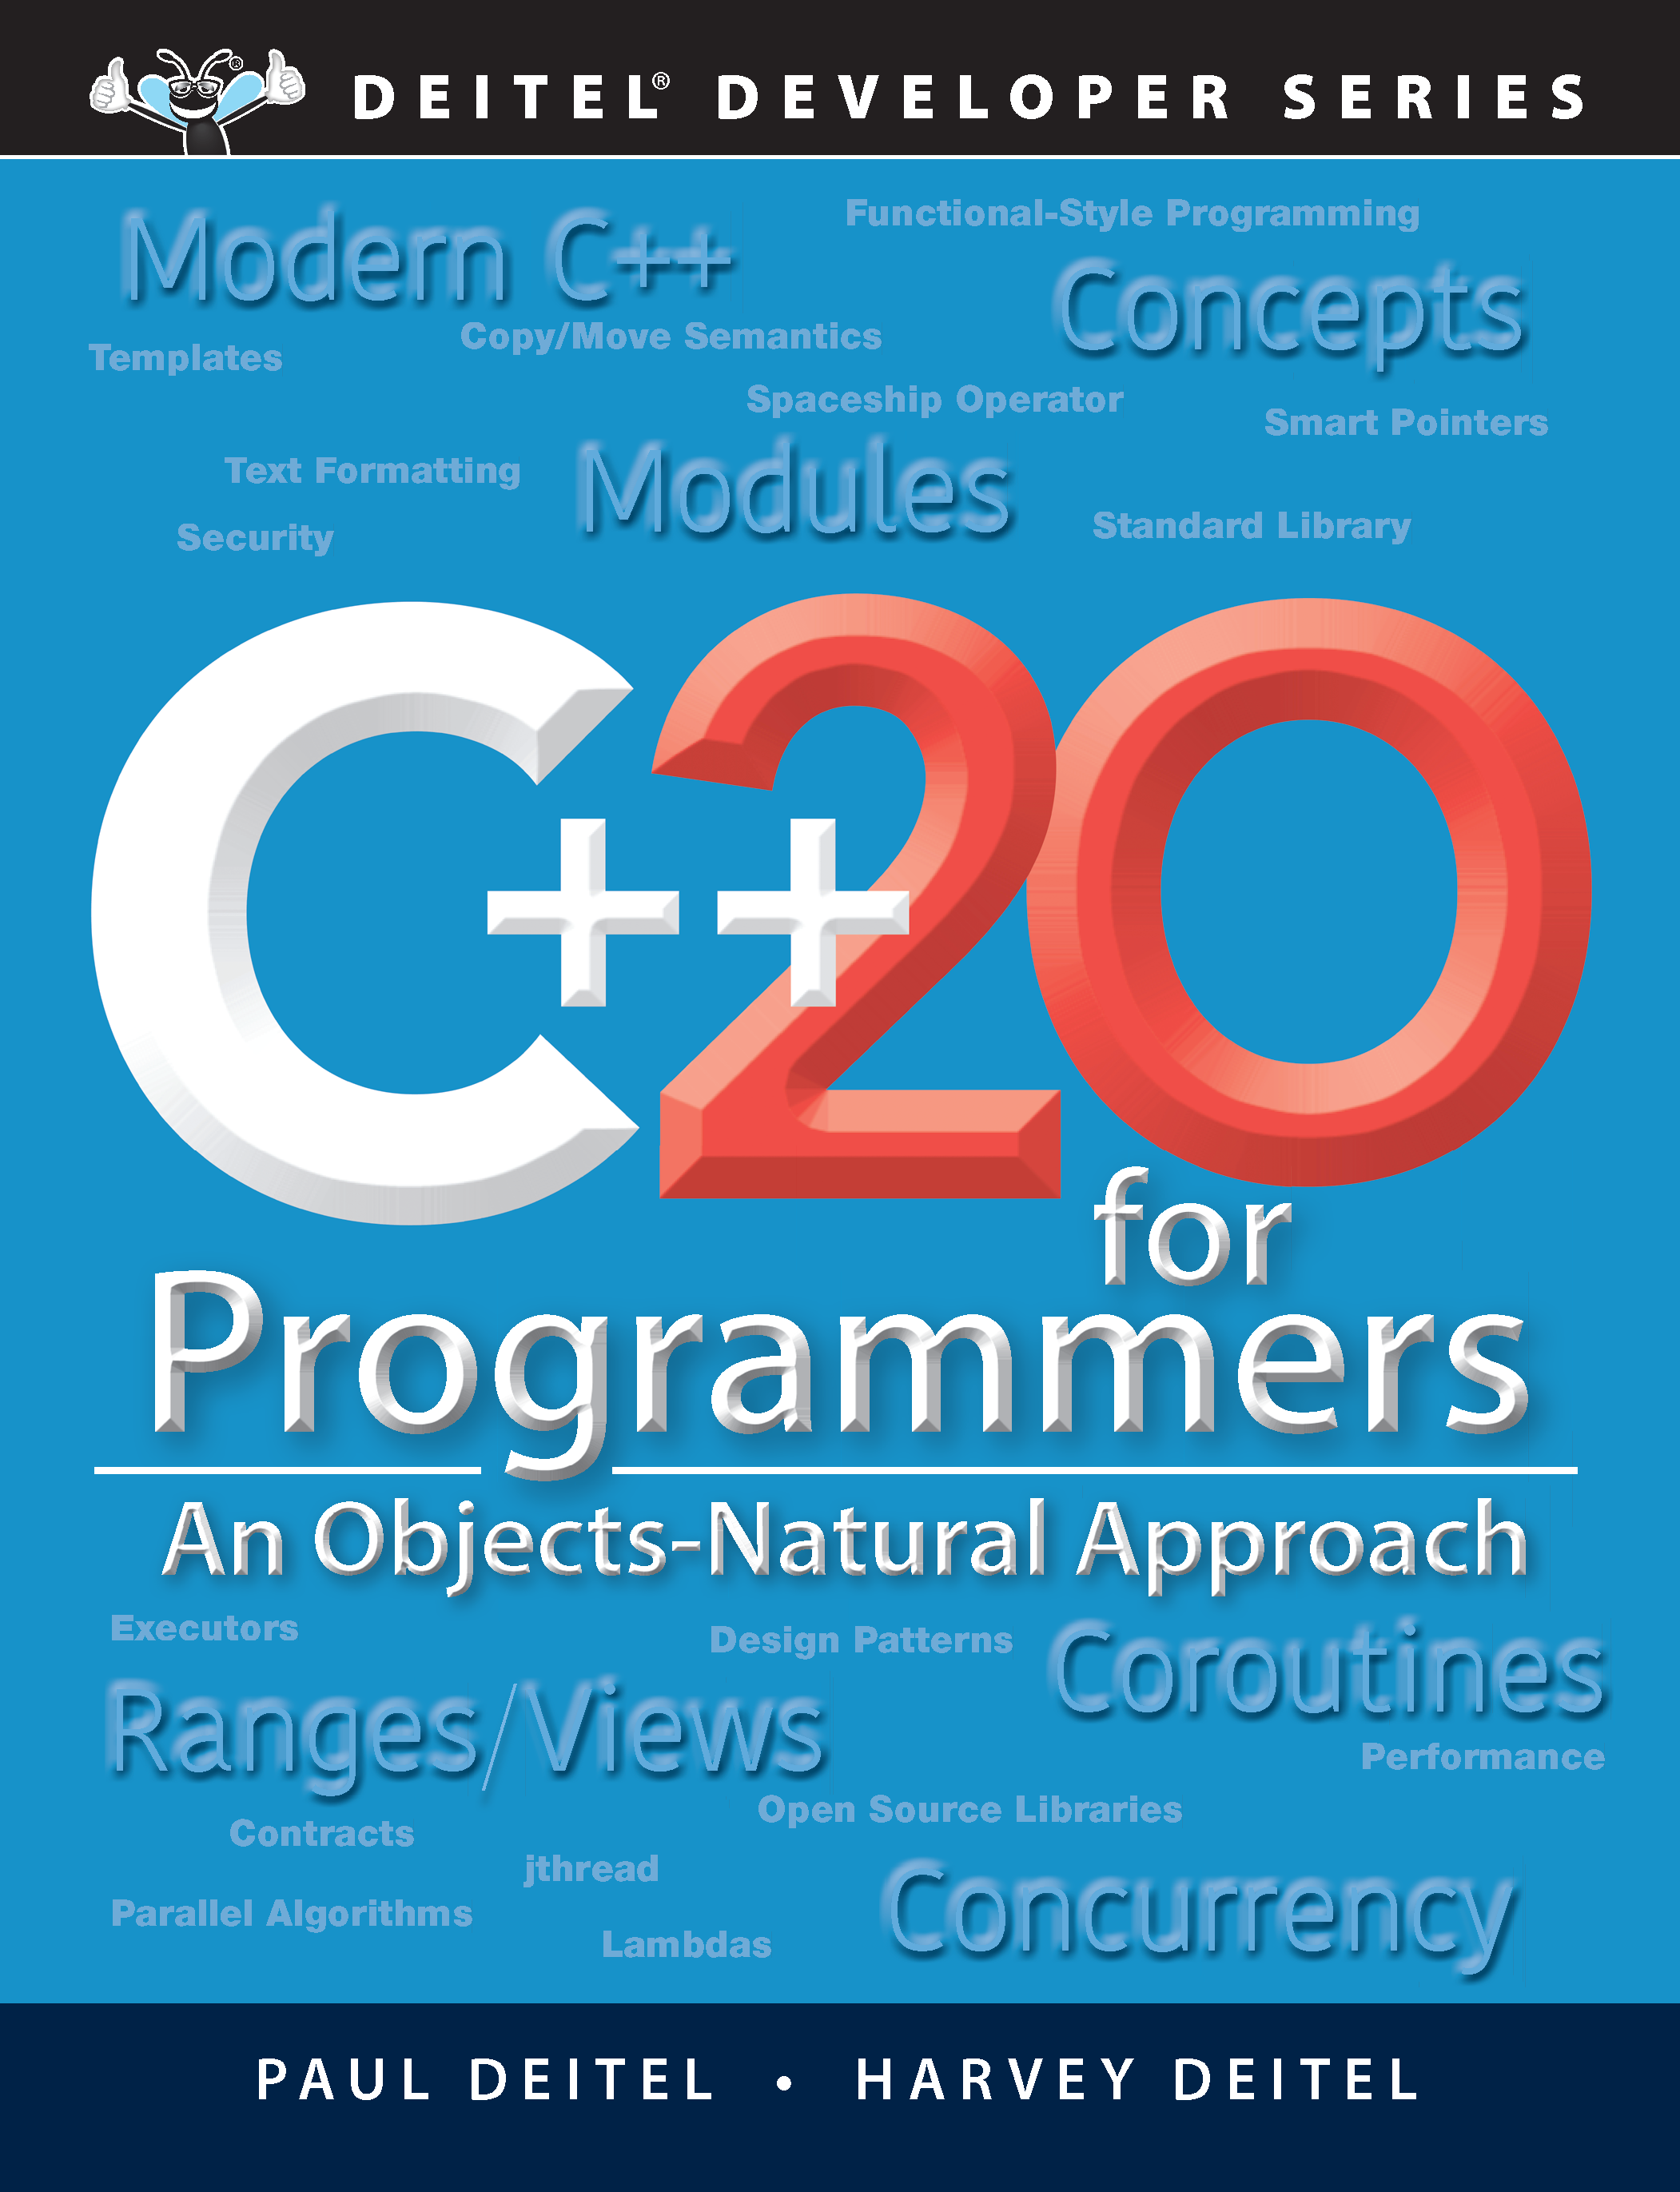 C++20 for Programmers Now Available to O'Reilly Online Learning Subscribers  - Deitel & Associates, Inc.